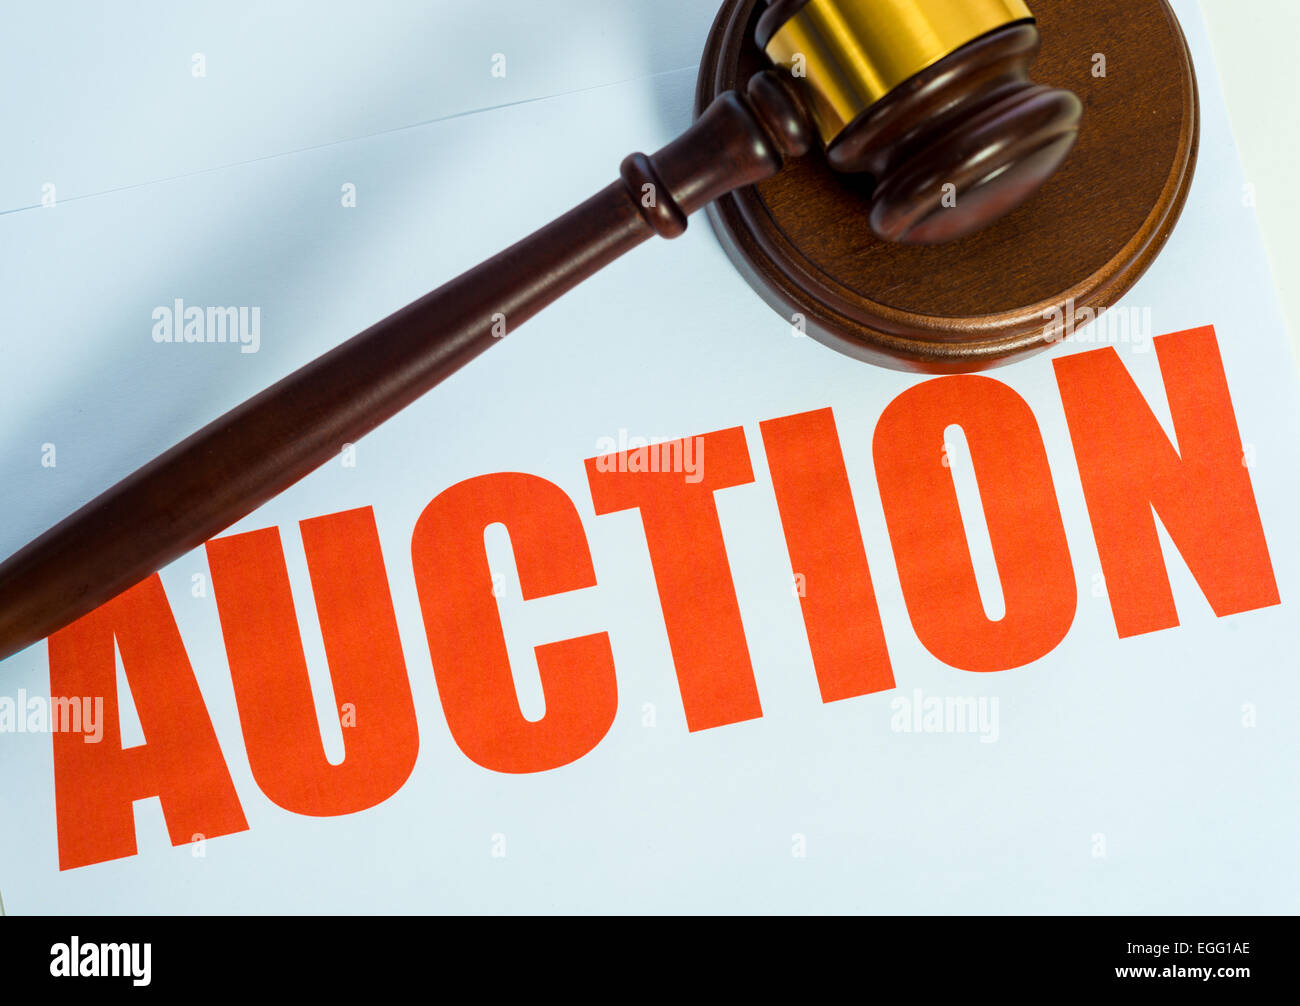 An auction sign and wooden mallet on a white background Stock Photo